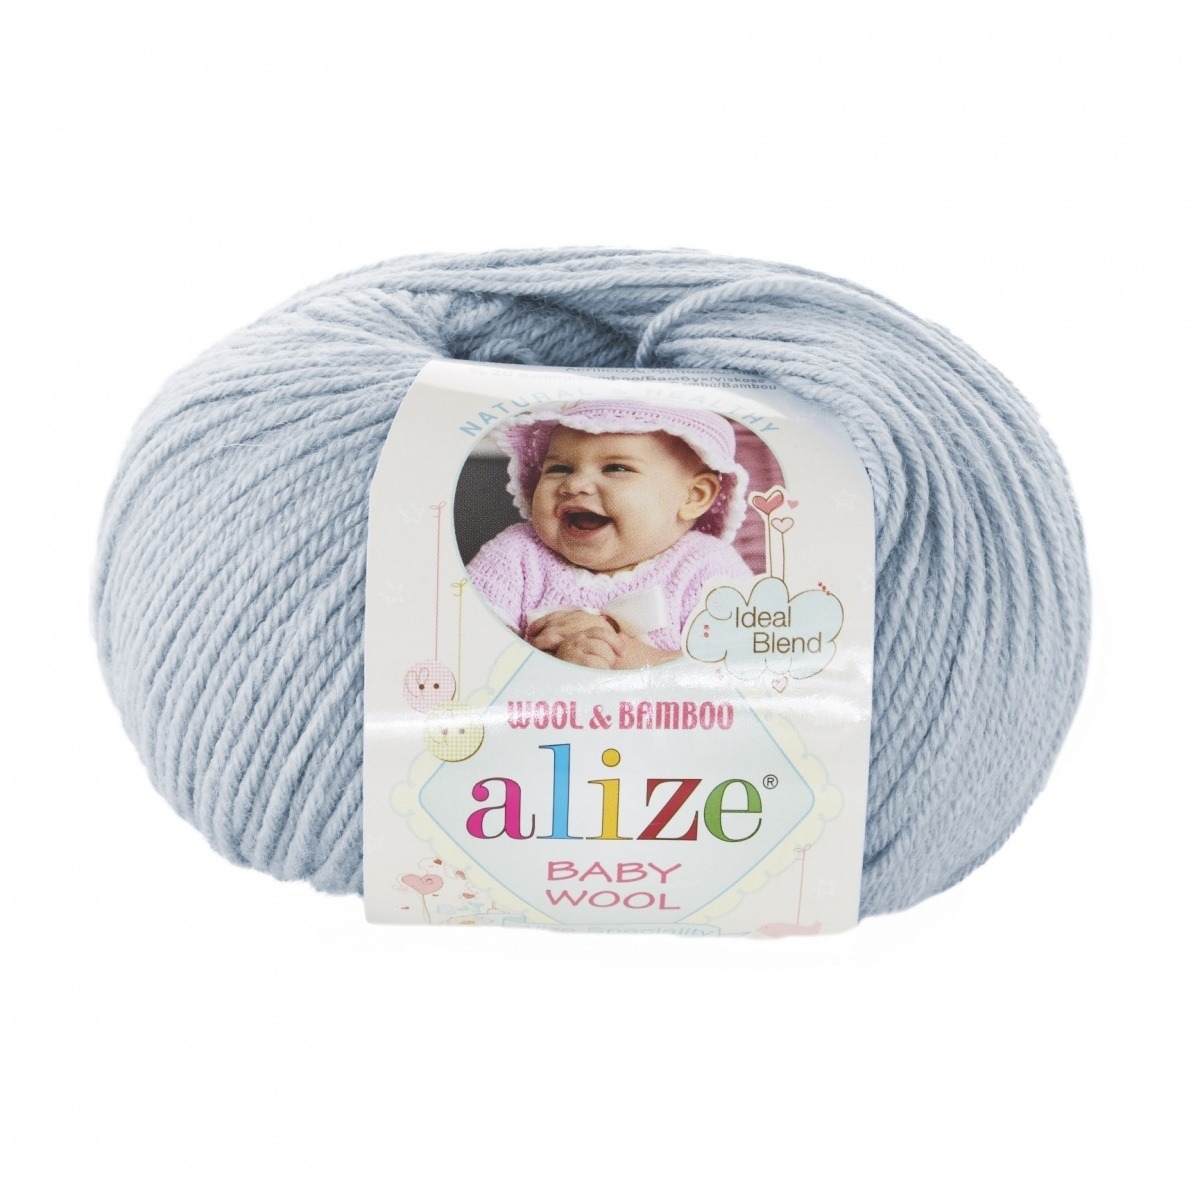 Alize "Baby wool" (224)